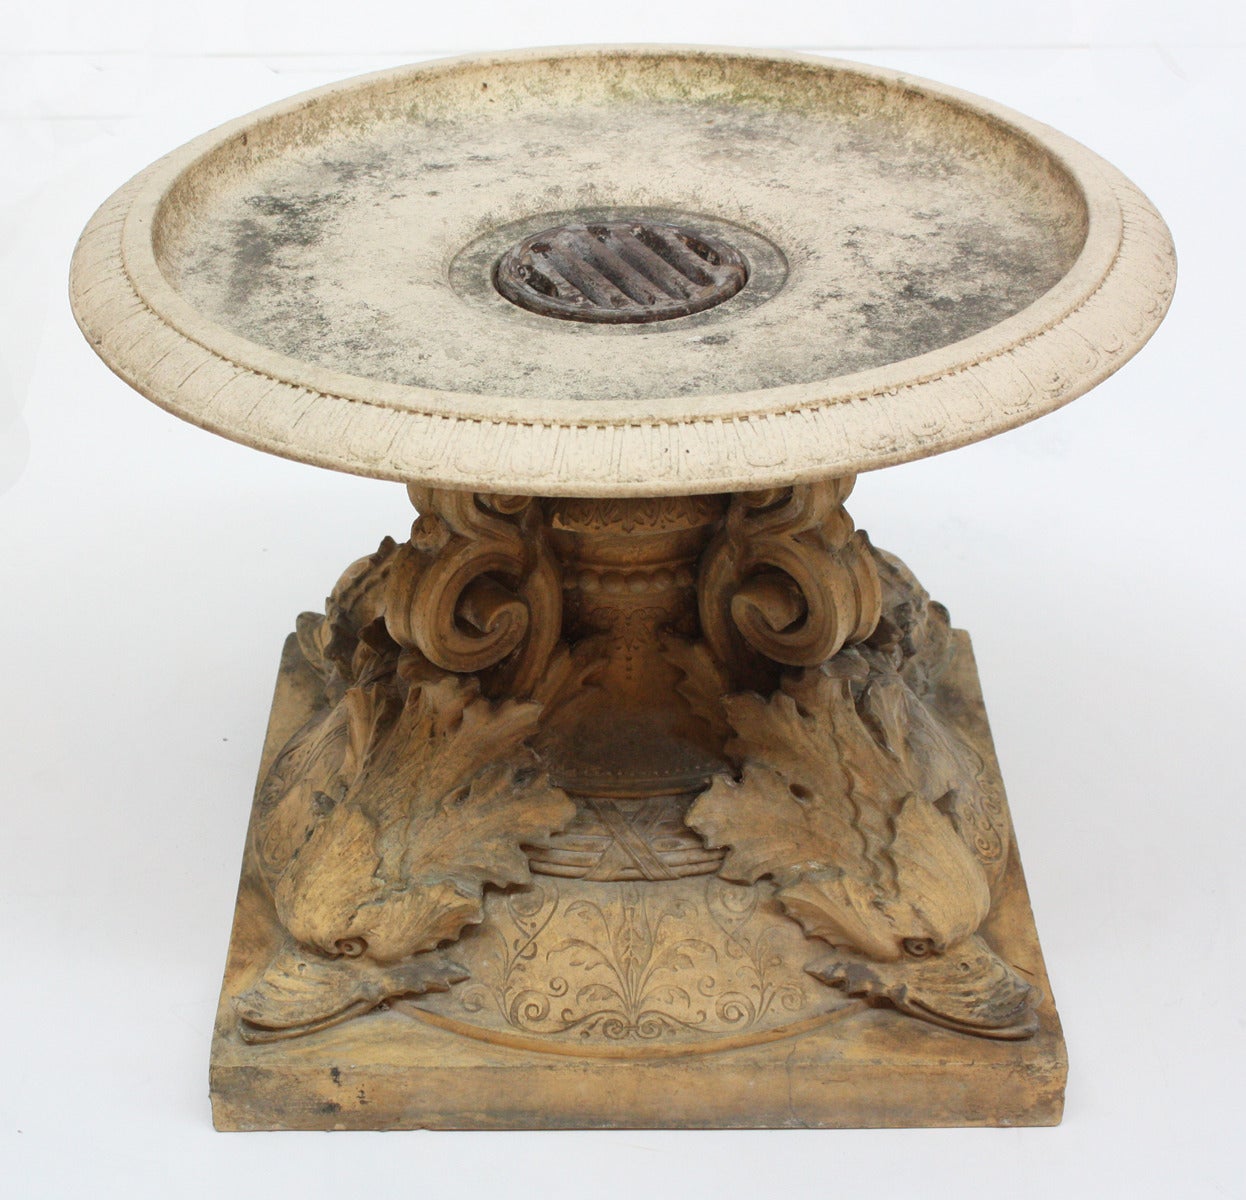 An ornate terra cotta fountain base with decorative upended dolphins supporting the top disc, England, late 19th century.